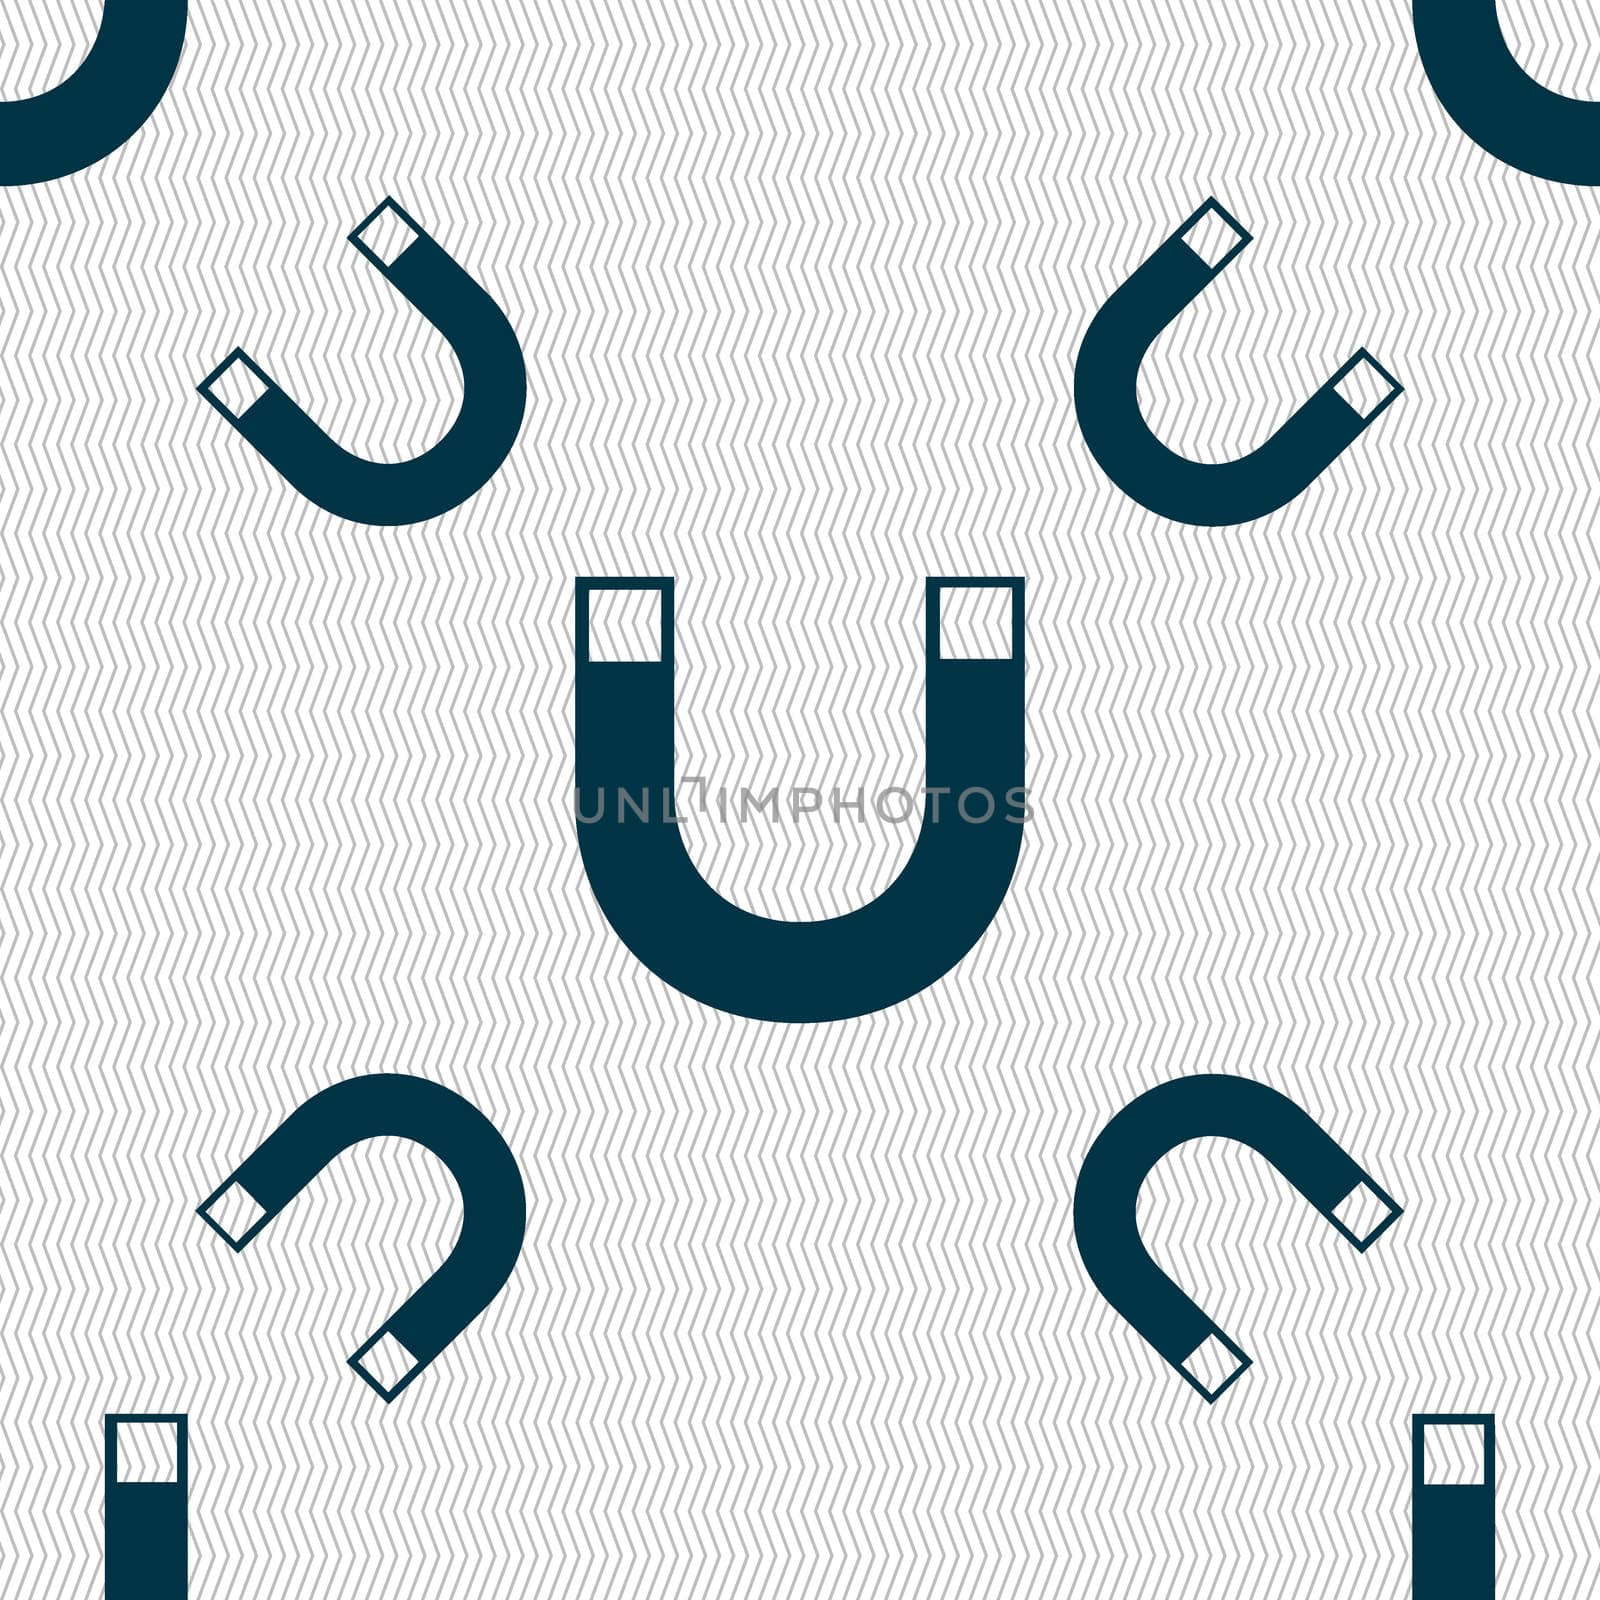 magnet sign icon. horseshoe it symbol. Repair sig. Seamless pattern with geometric texture. illustration